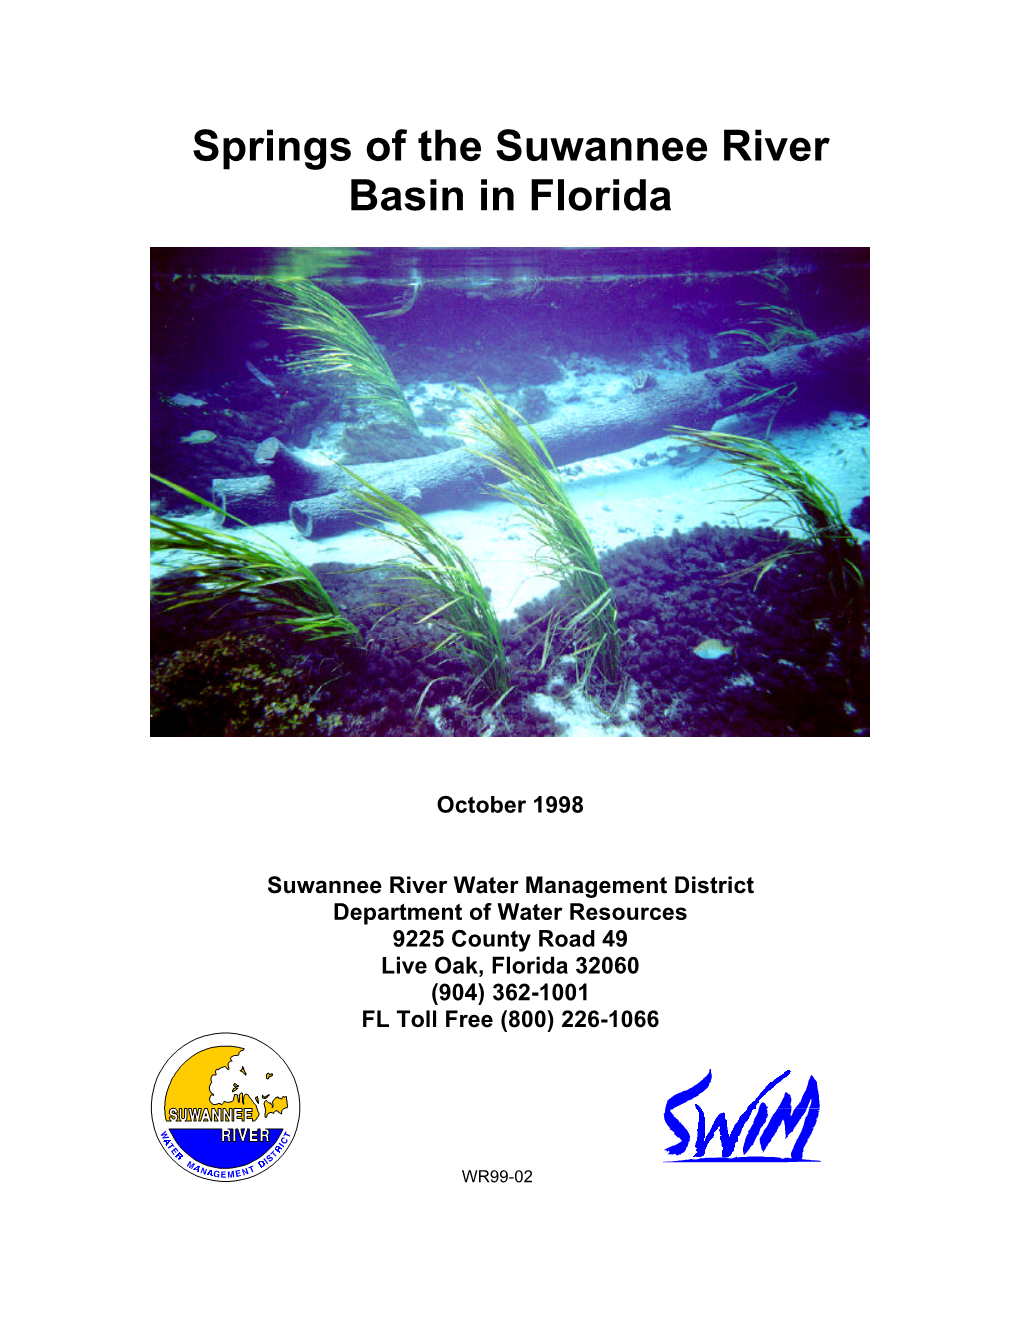 Springs of the Suwannee River Basin in Florida